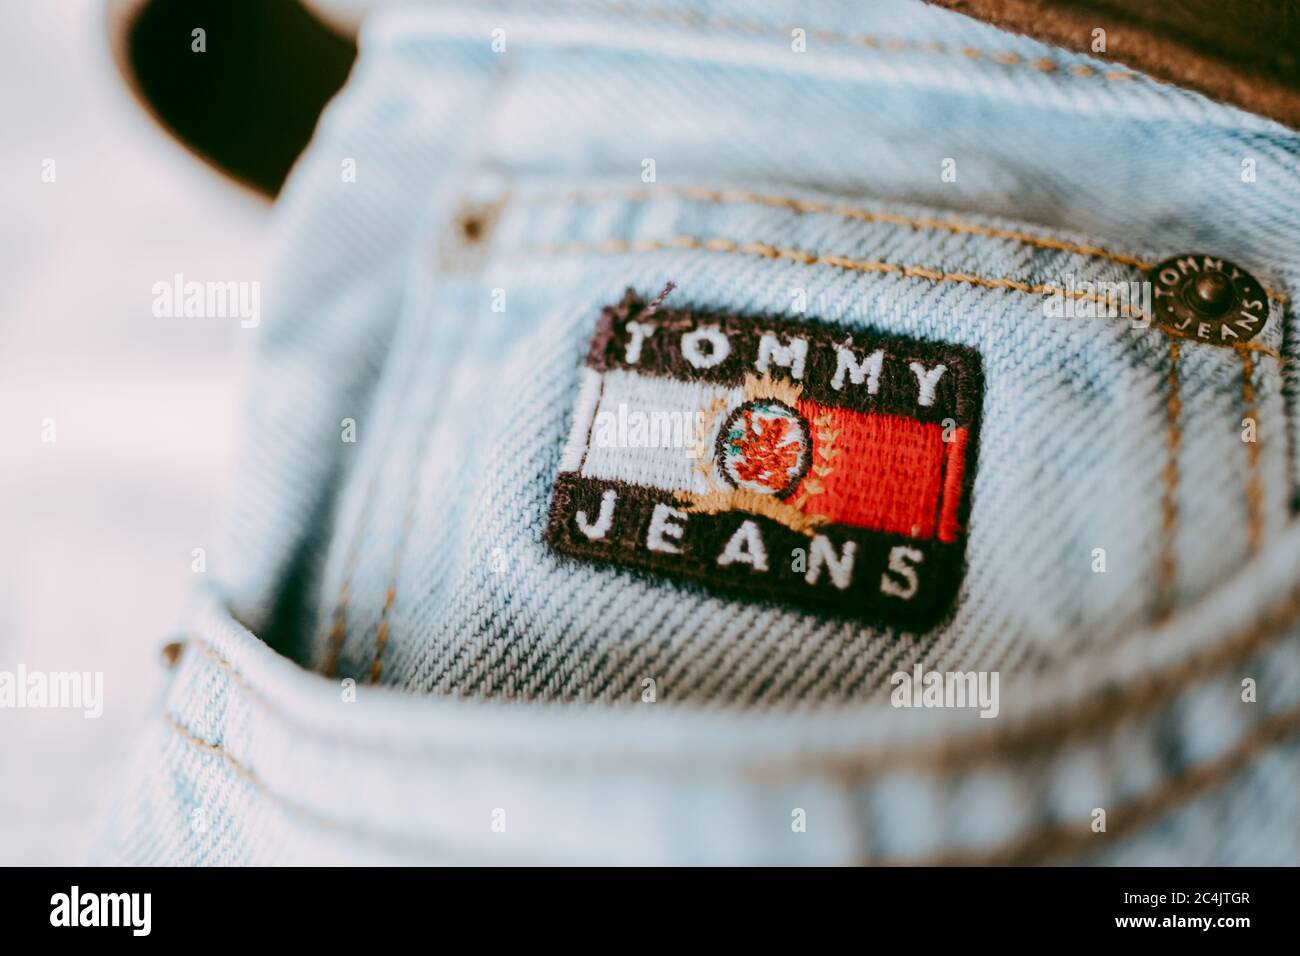 icon 6.0 tommy